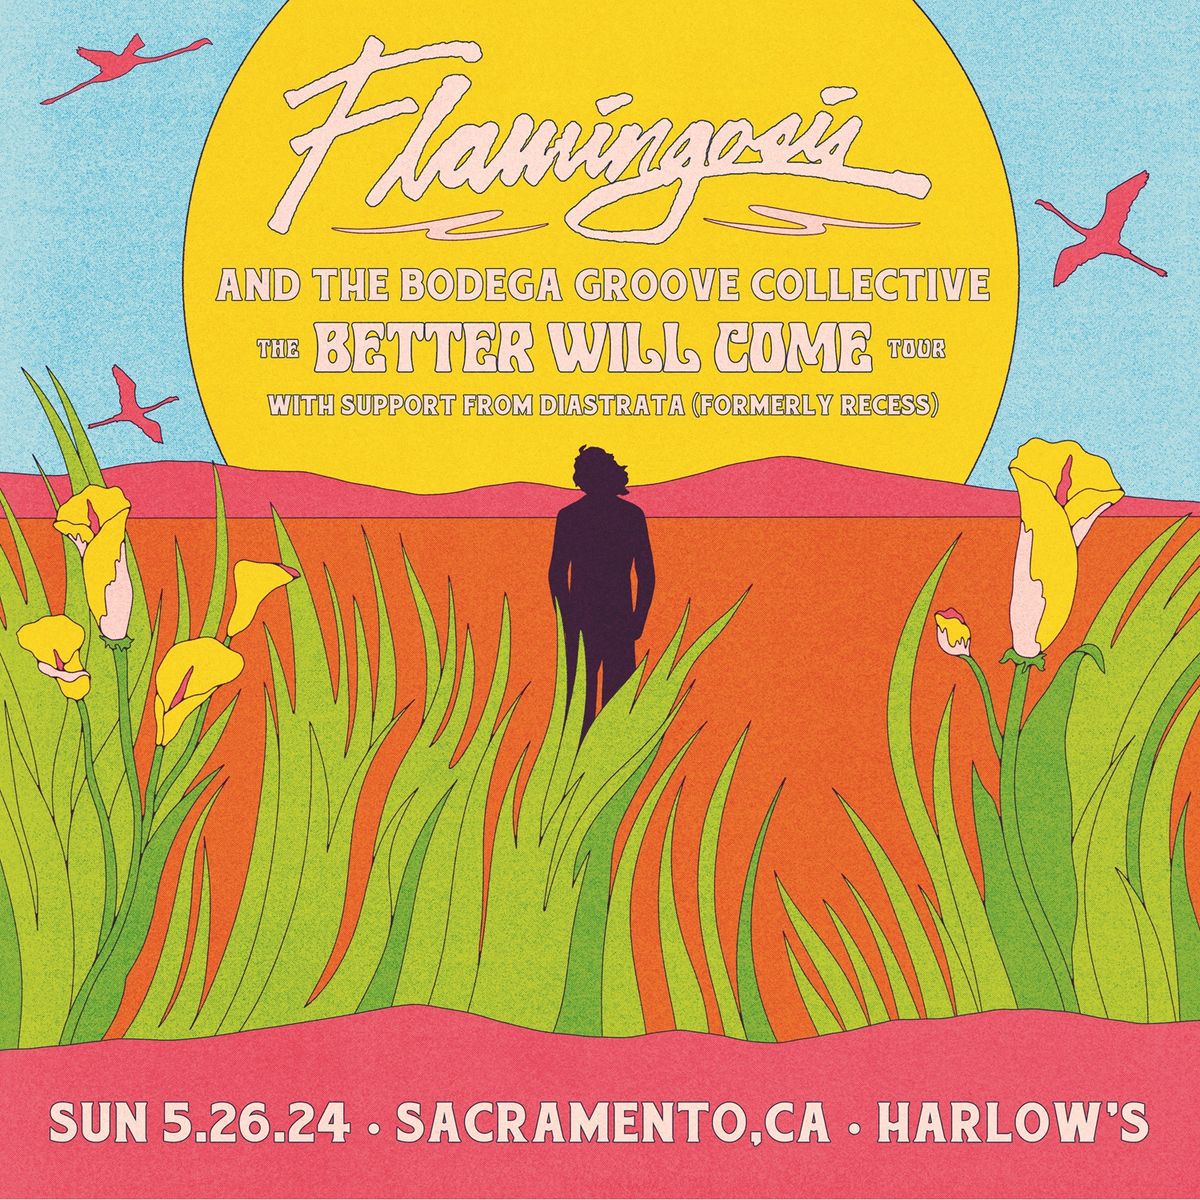 Flamingosis and the Bodega Groove Collective at Harlow's with Diastrata